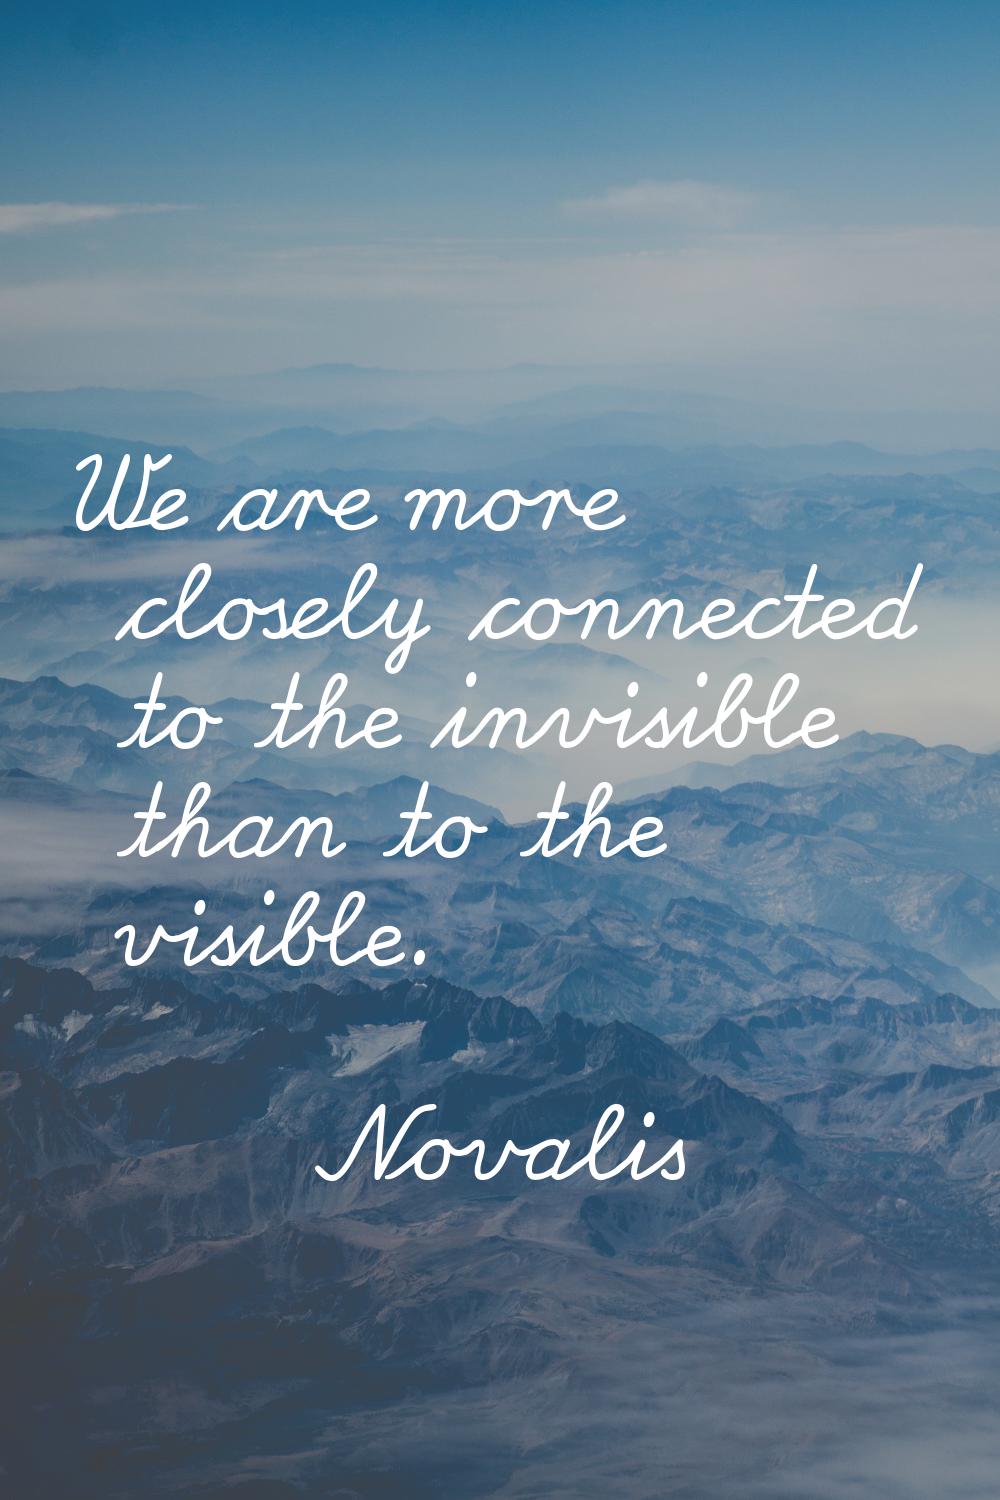 We are more closely connected to the invisible than to the visible.